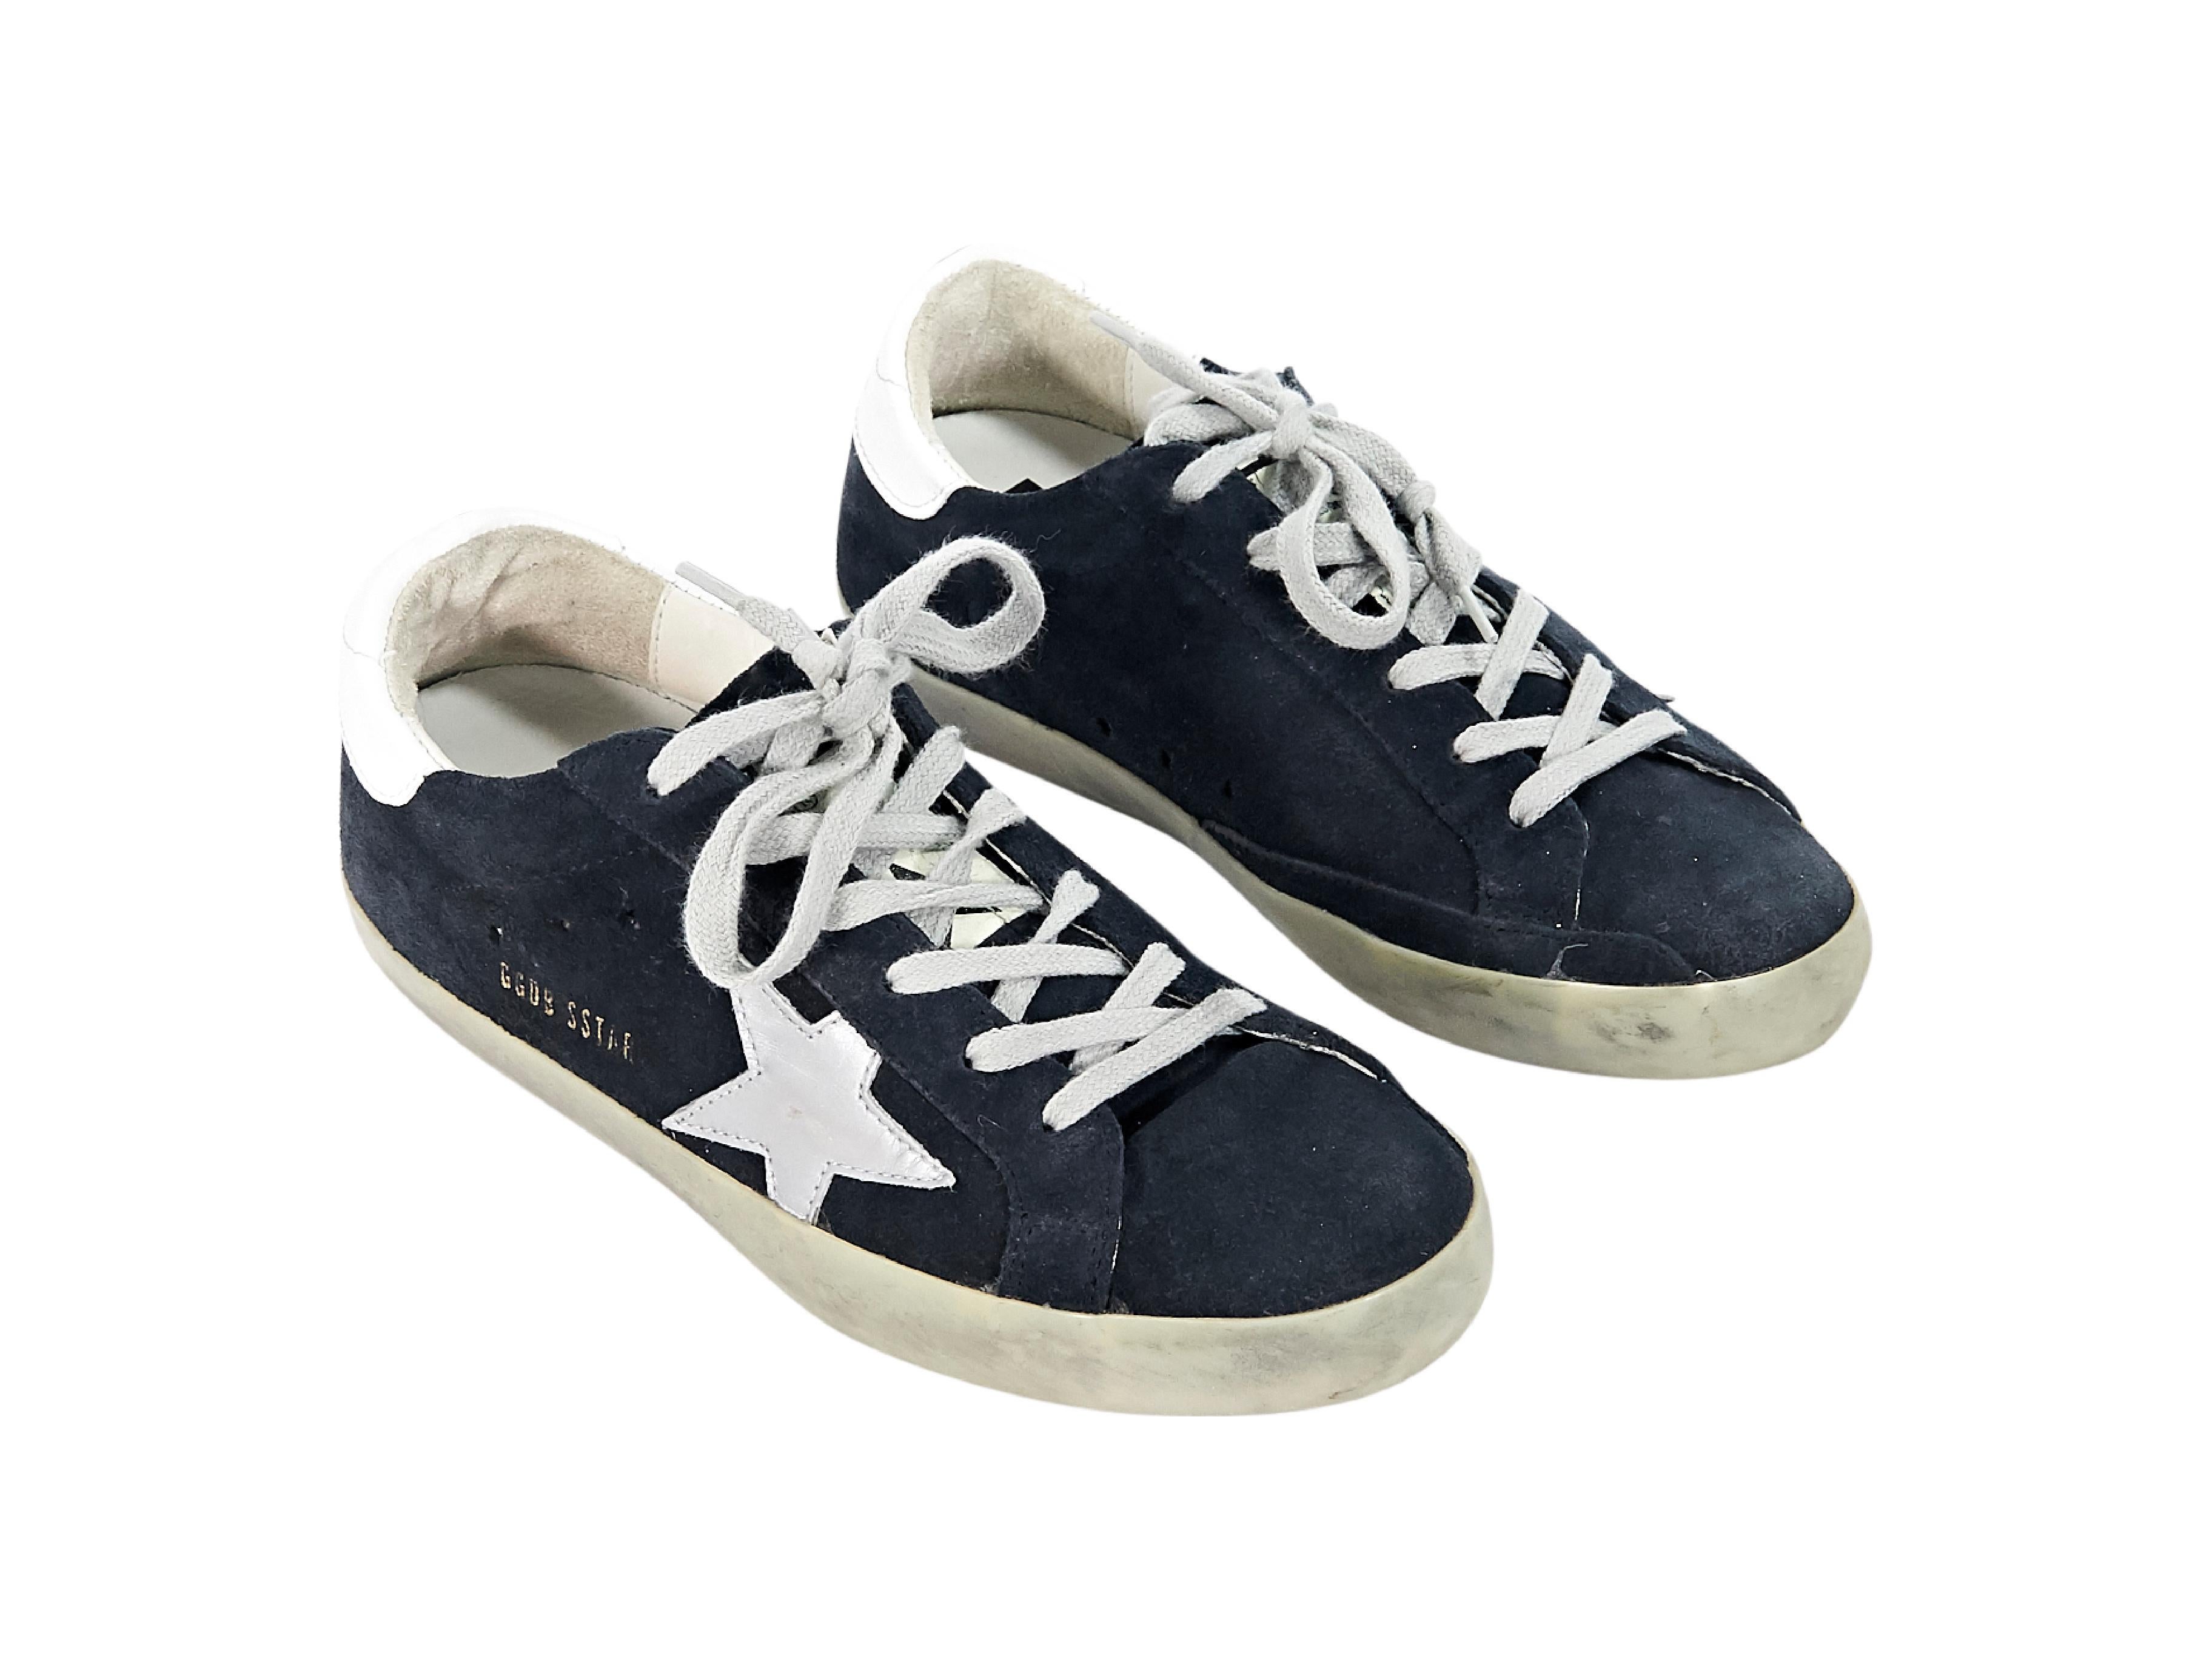 Product details:  Navy blue suede Superstar sneakers by Golden Goose Deluxe Brand.  Distressed design.  Lace-up closure.  Round toe.  
Condition: Pre-owned. Very good. 
Est. Retail $ 670.00